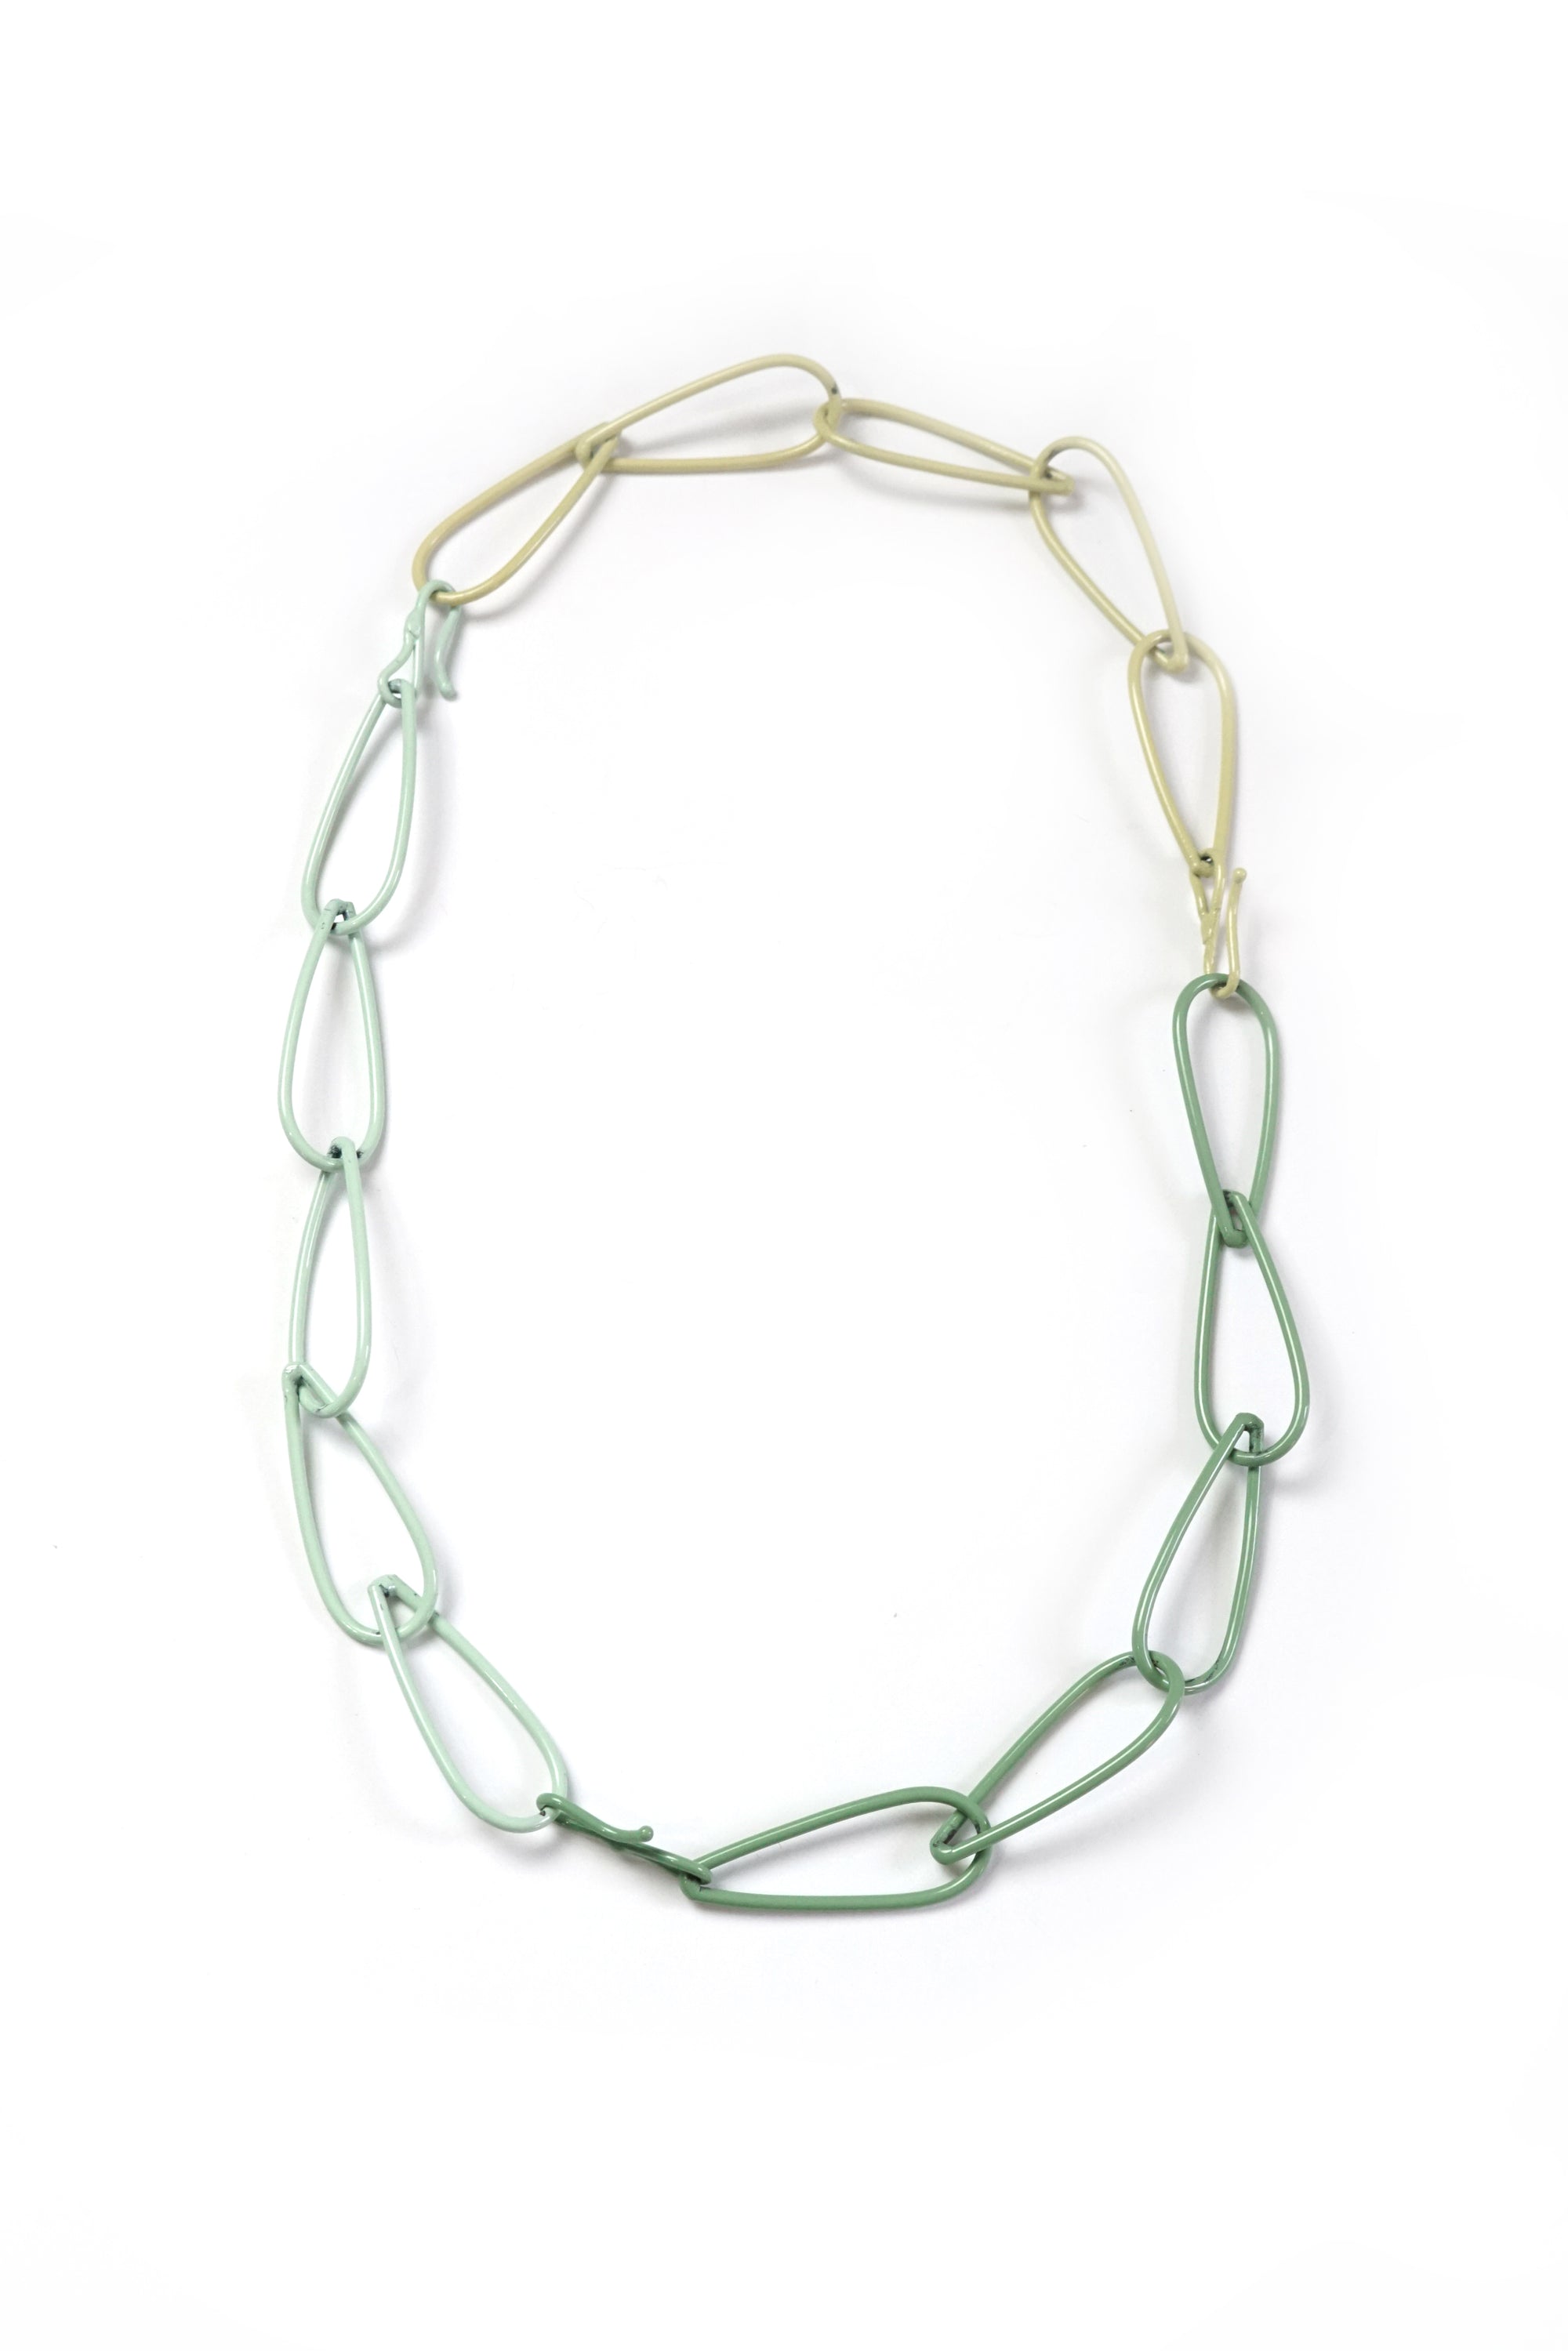 Modular Necklace in Pale Green, Soft Mint, and Green Sand